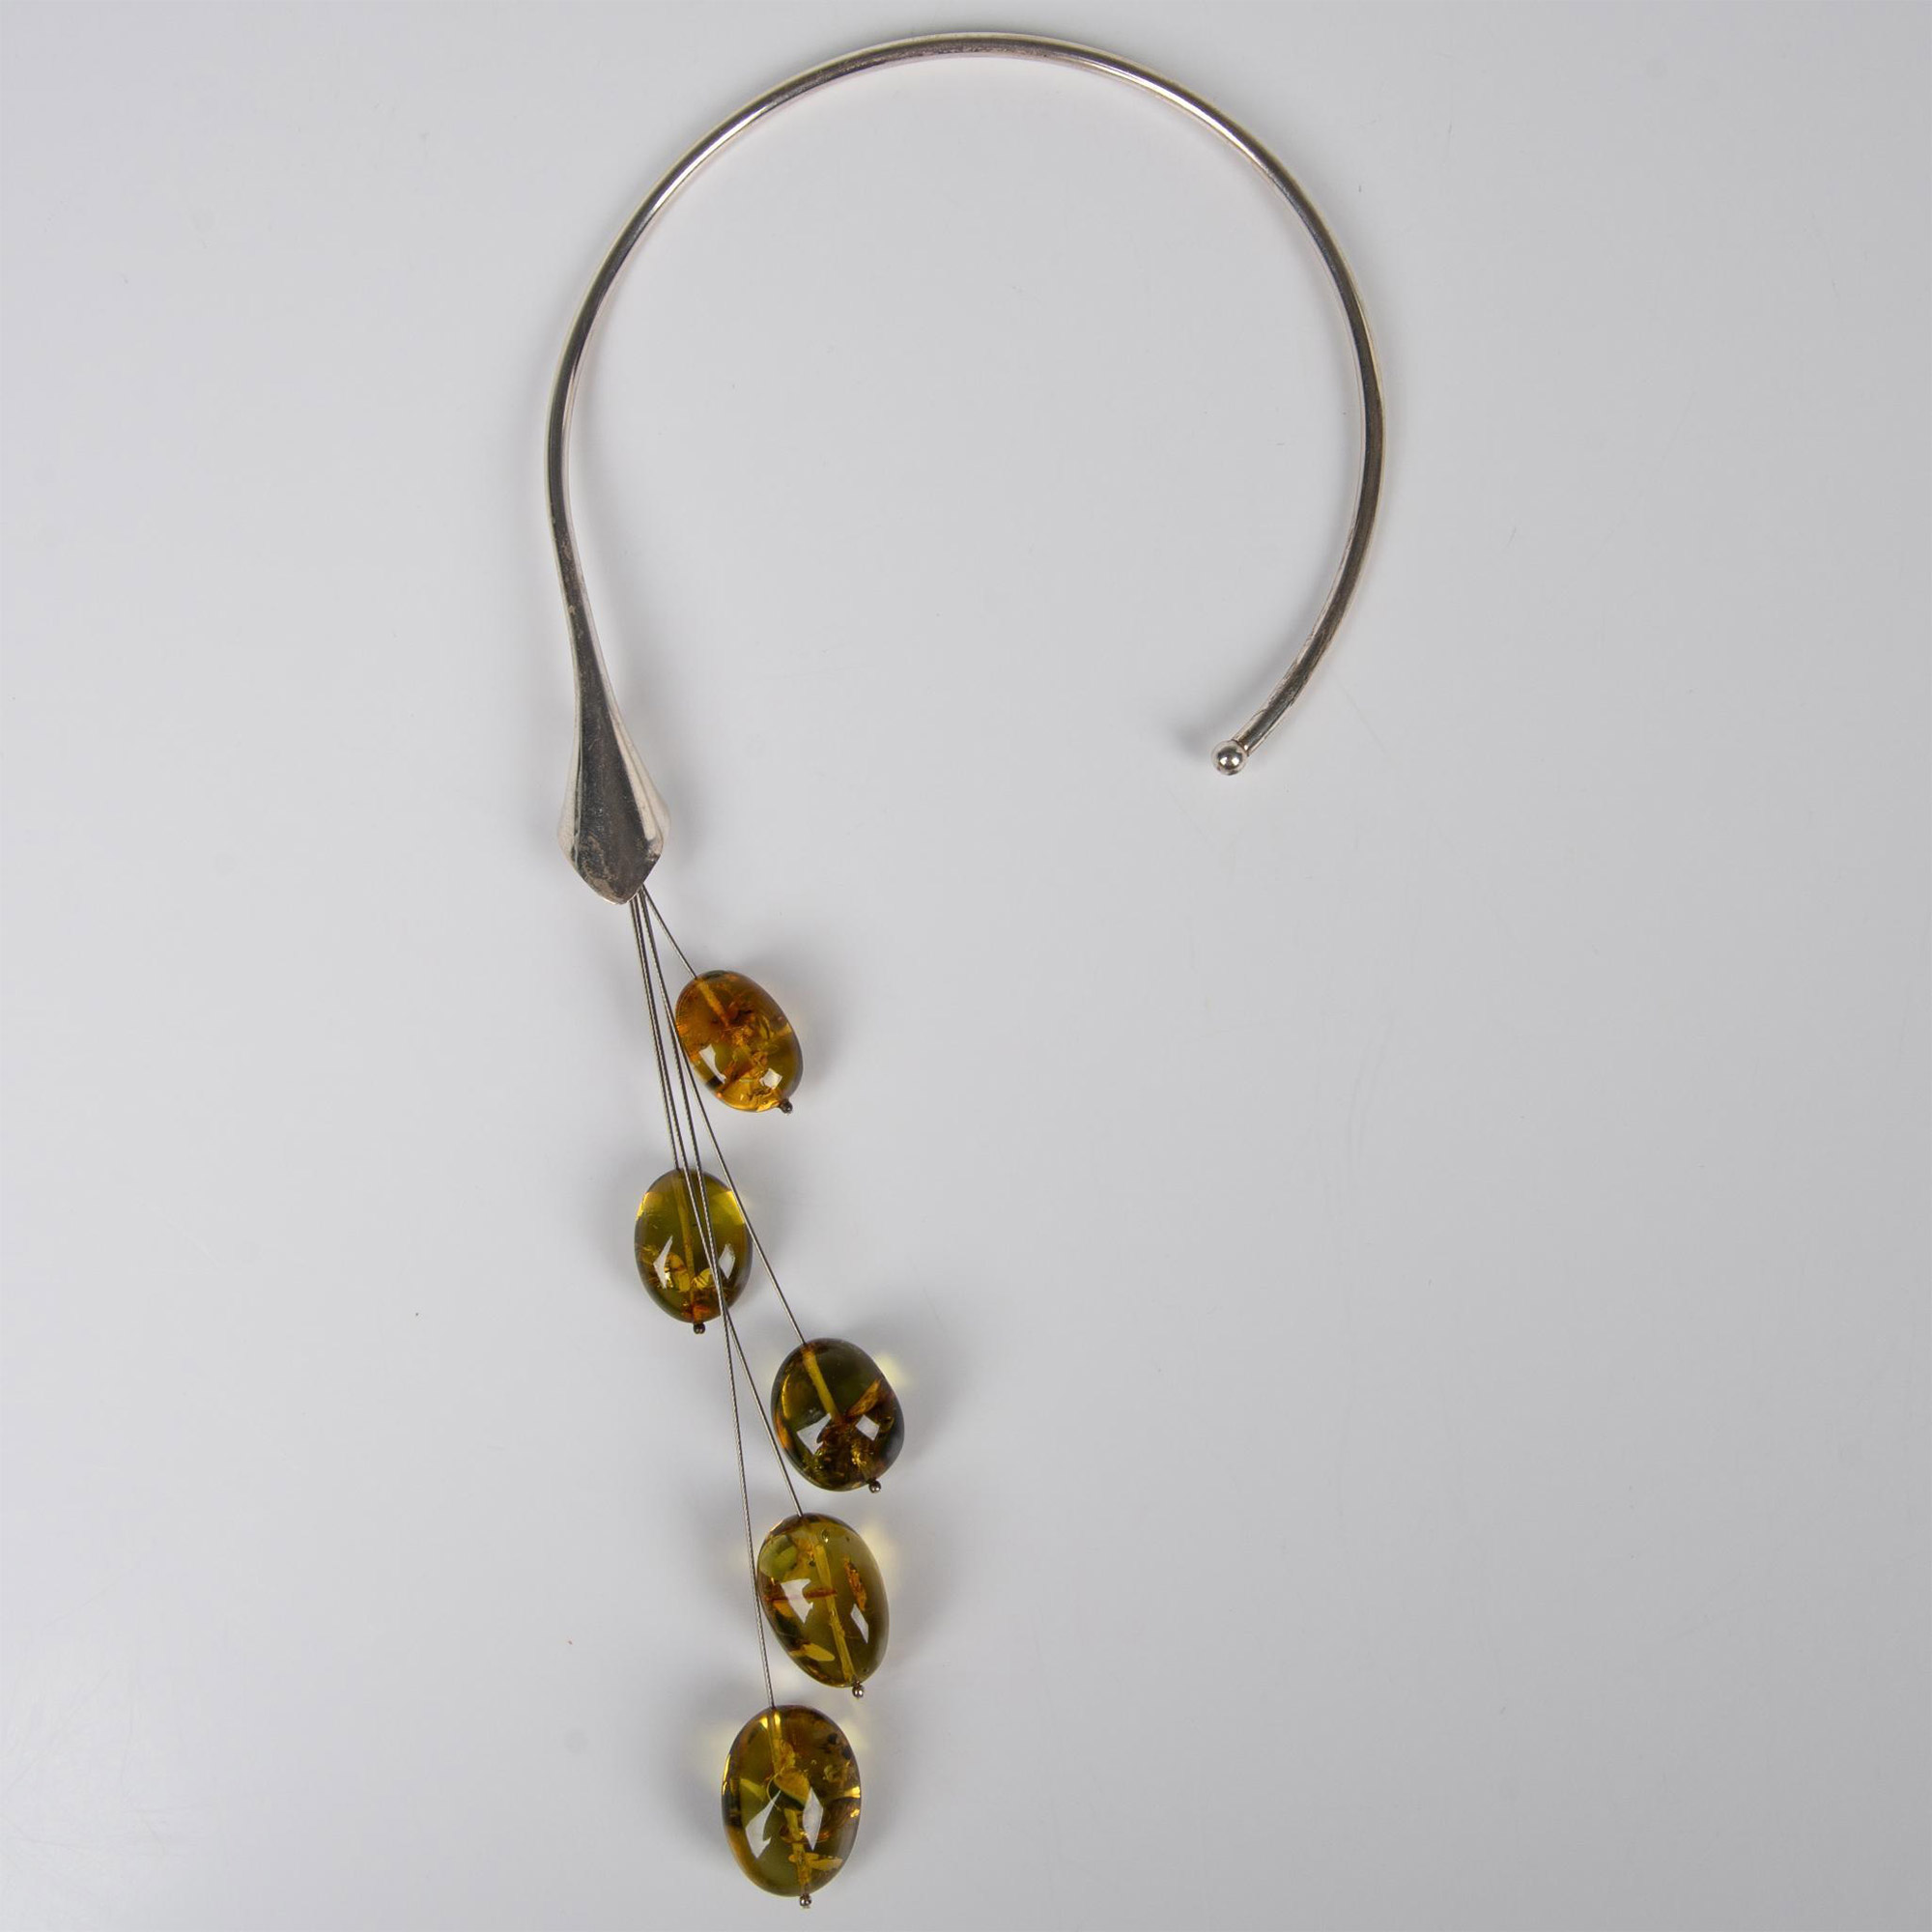 Sterling Silver and Amber Drop Necklace - Image 4 of 4